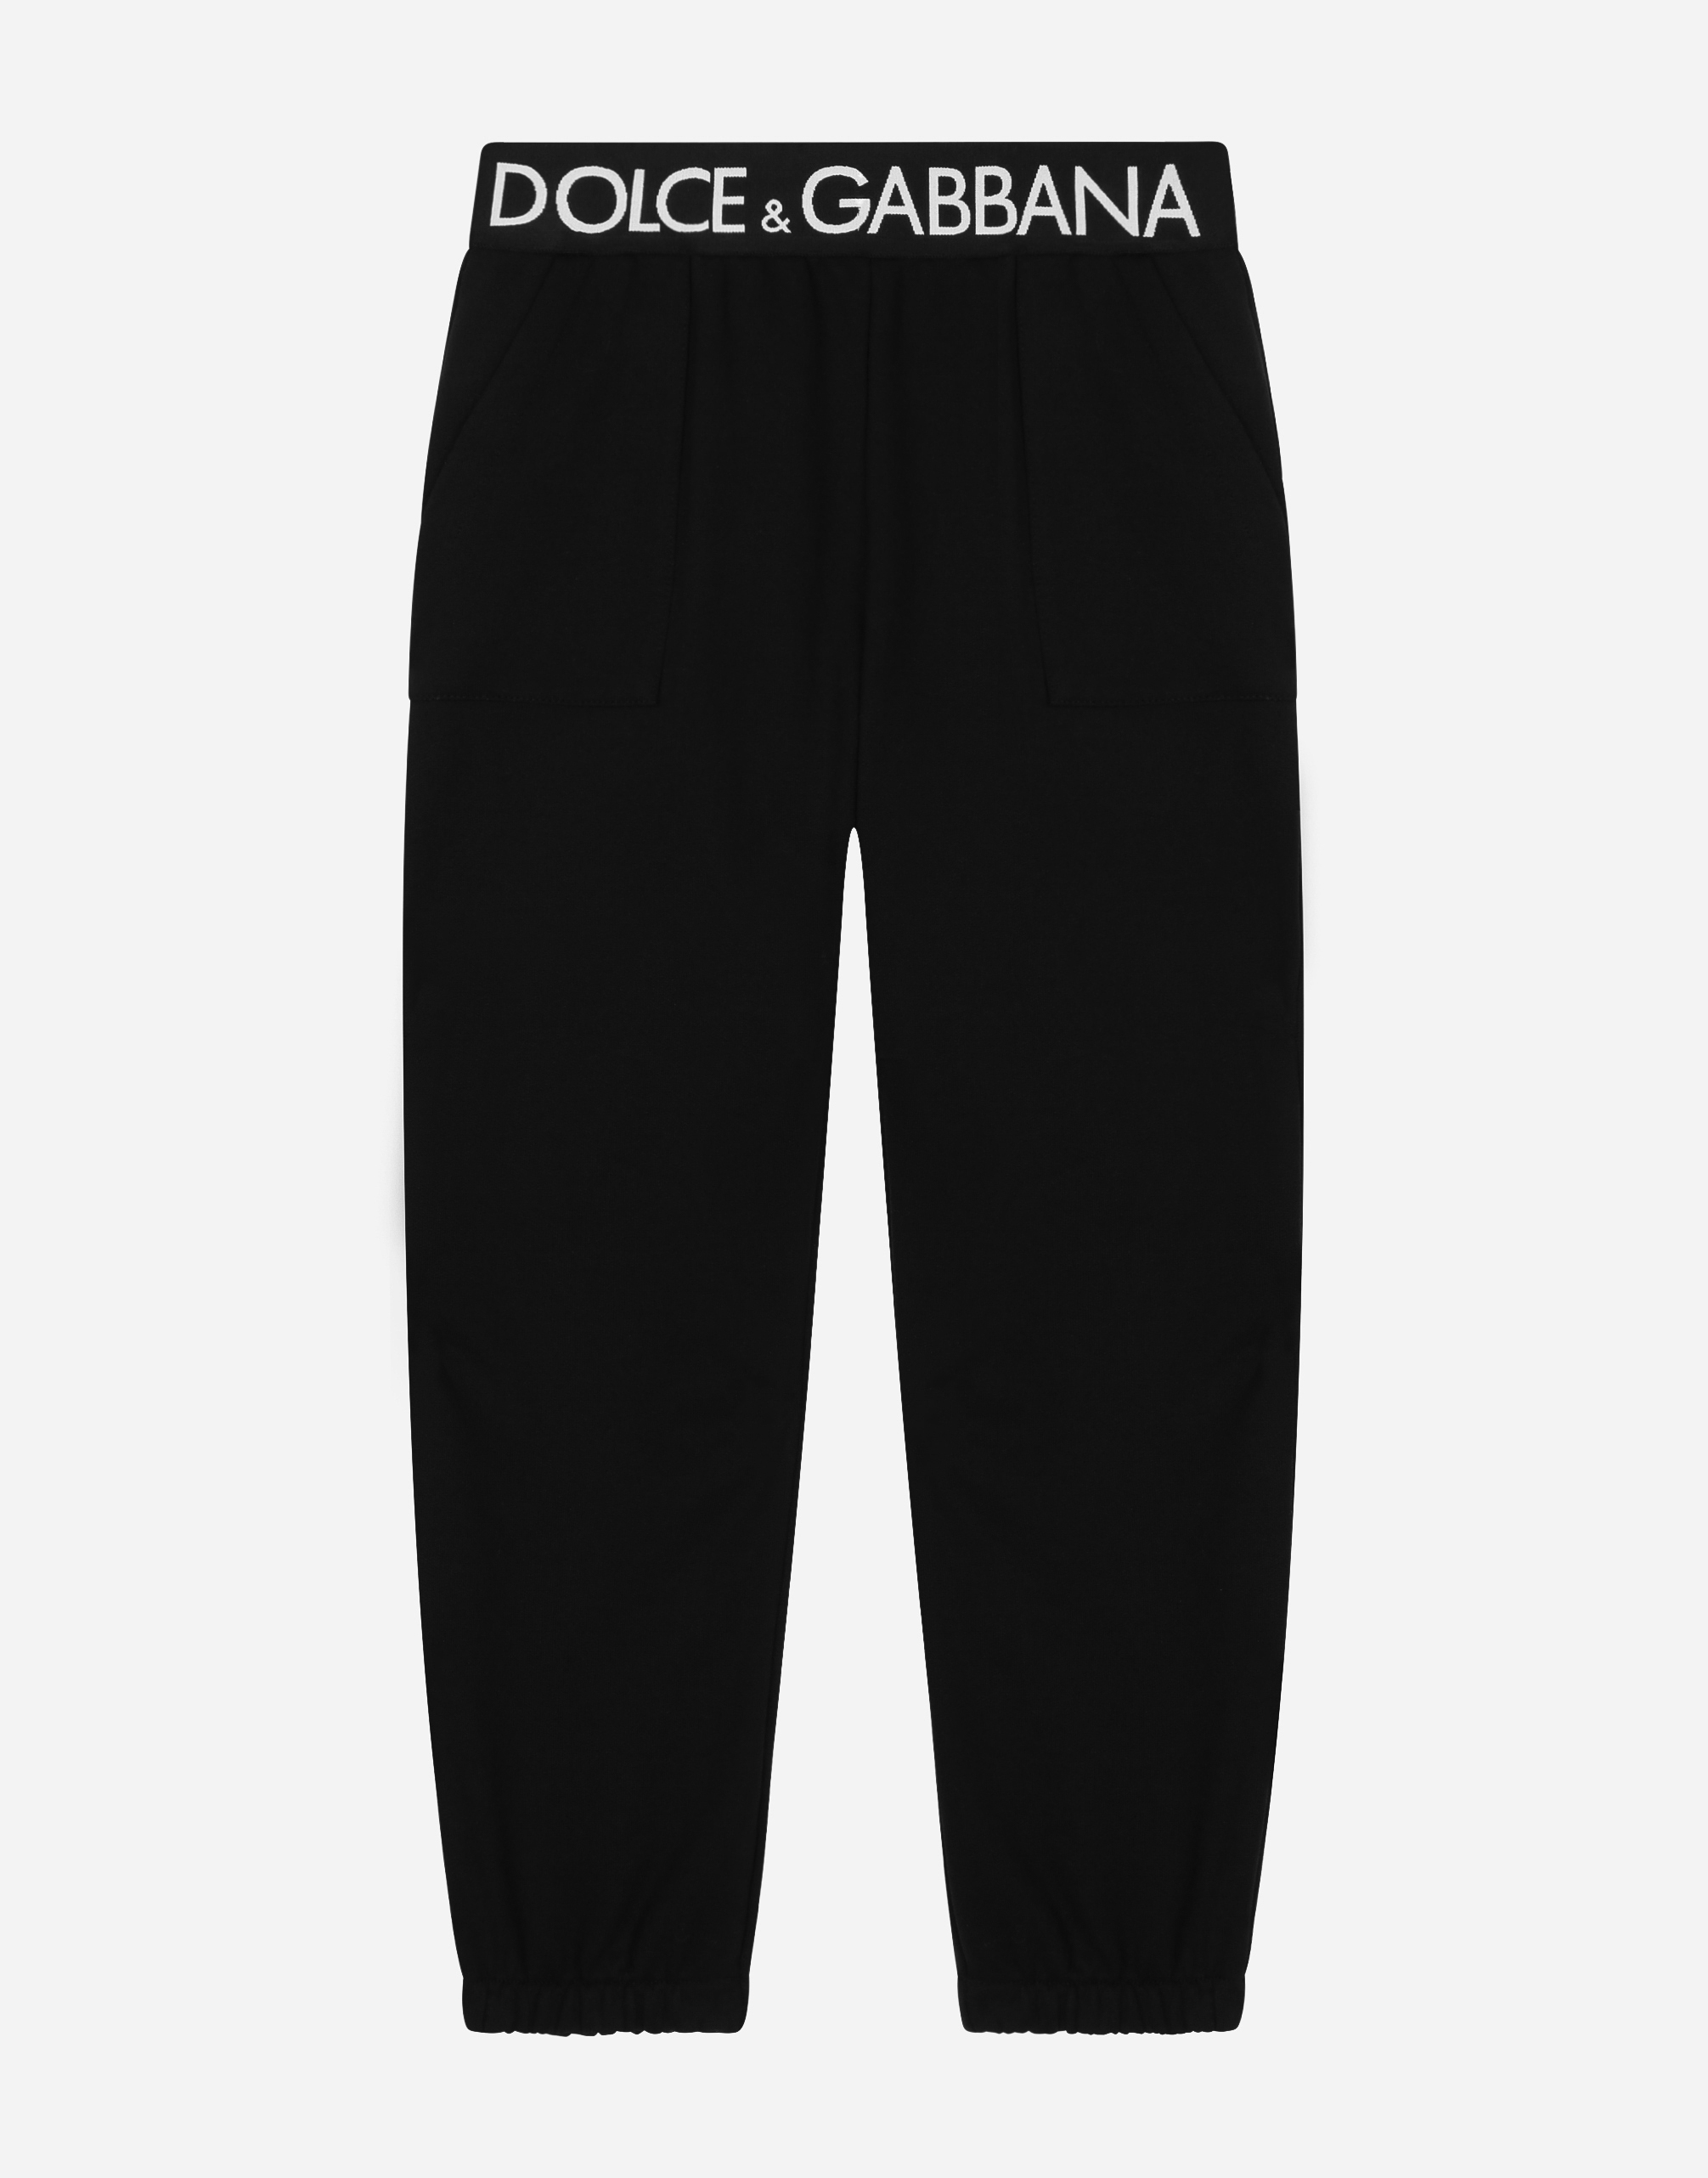 Dolce & Gabbana Jersey Jogging Pants With Branded Elastic Waistband In Black